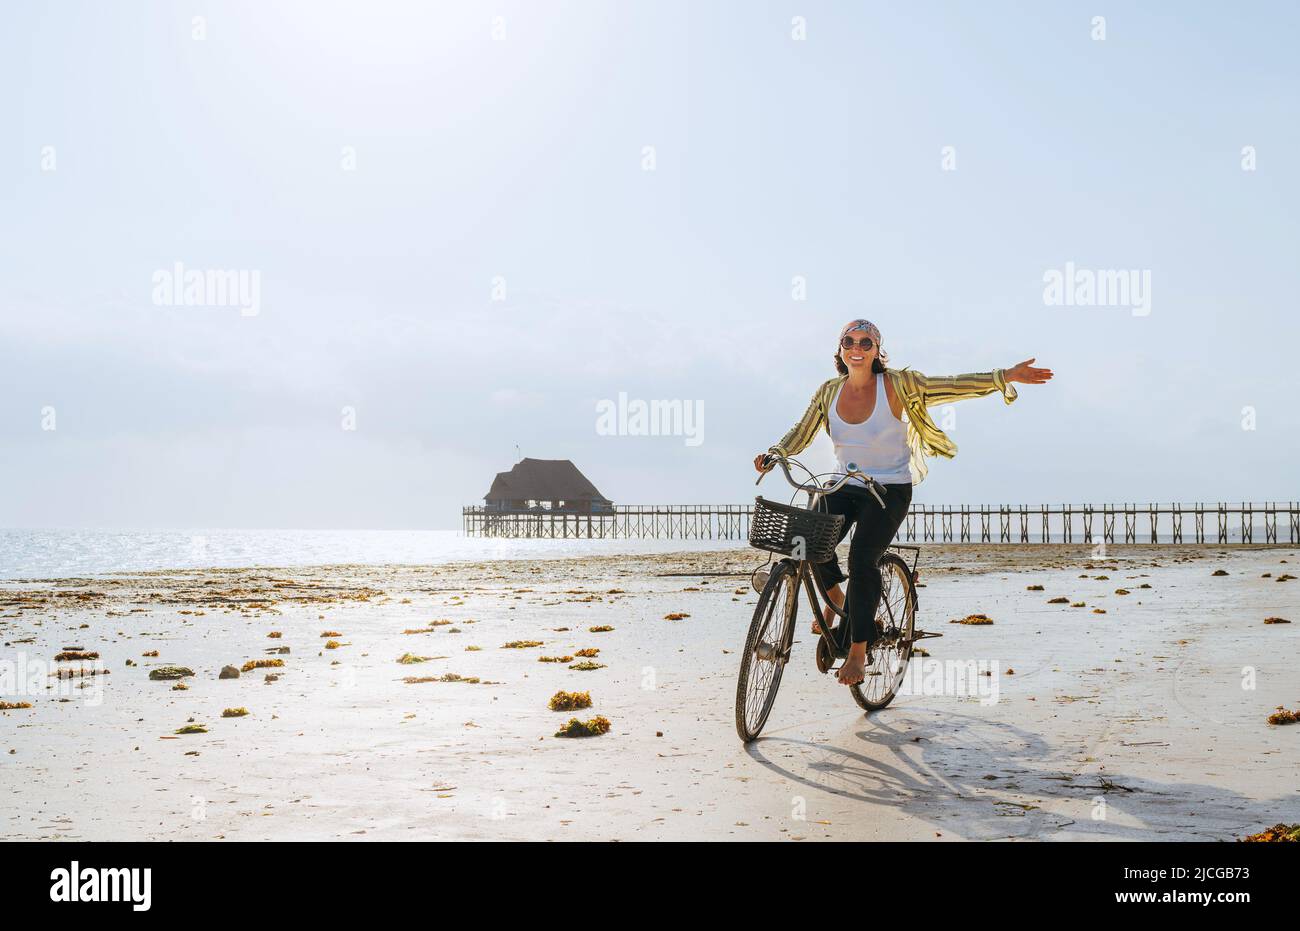 A young female dressed in light summer clothes joyfully threw up her hand while riding old vintage bicycle with a basket on the low tide ocean white s Stock Photo